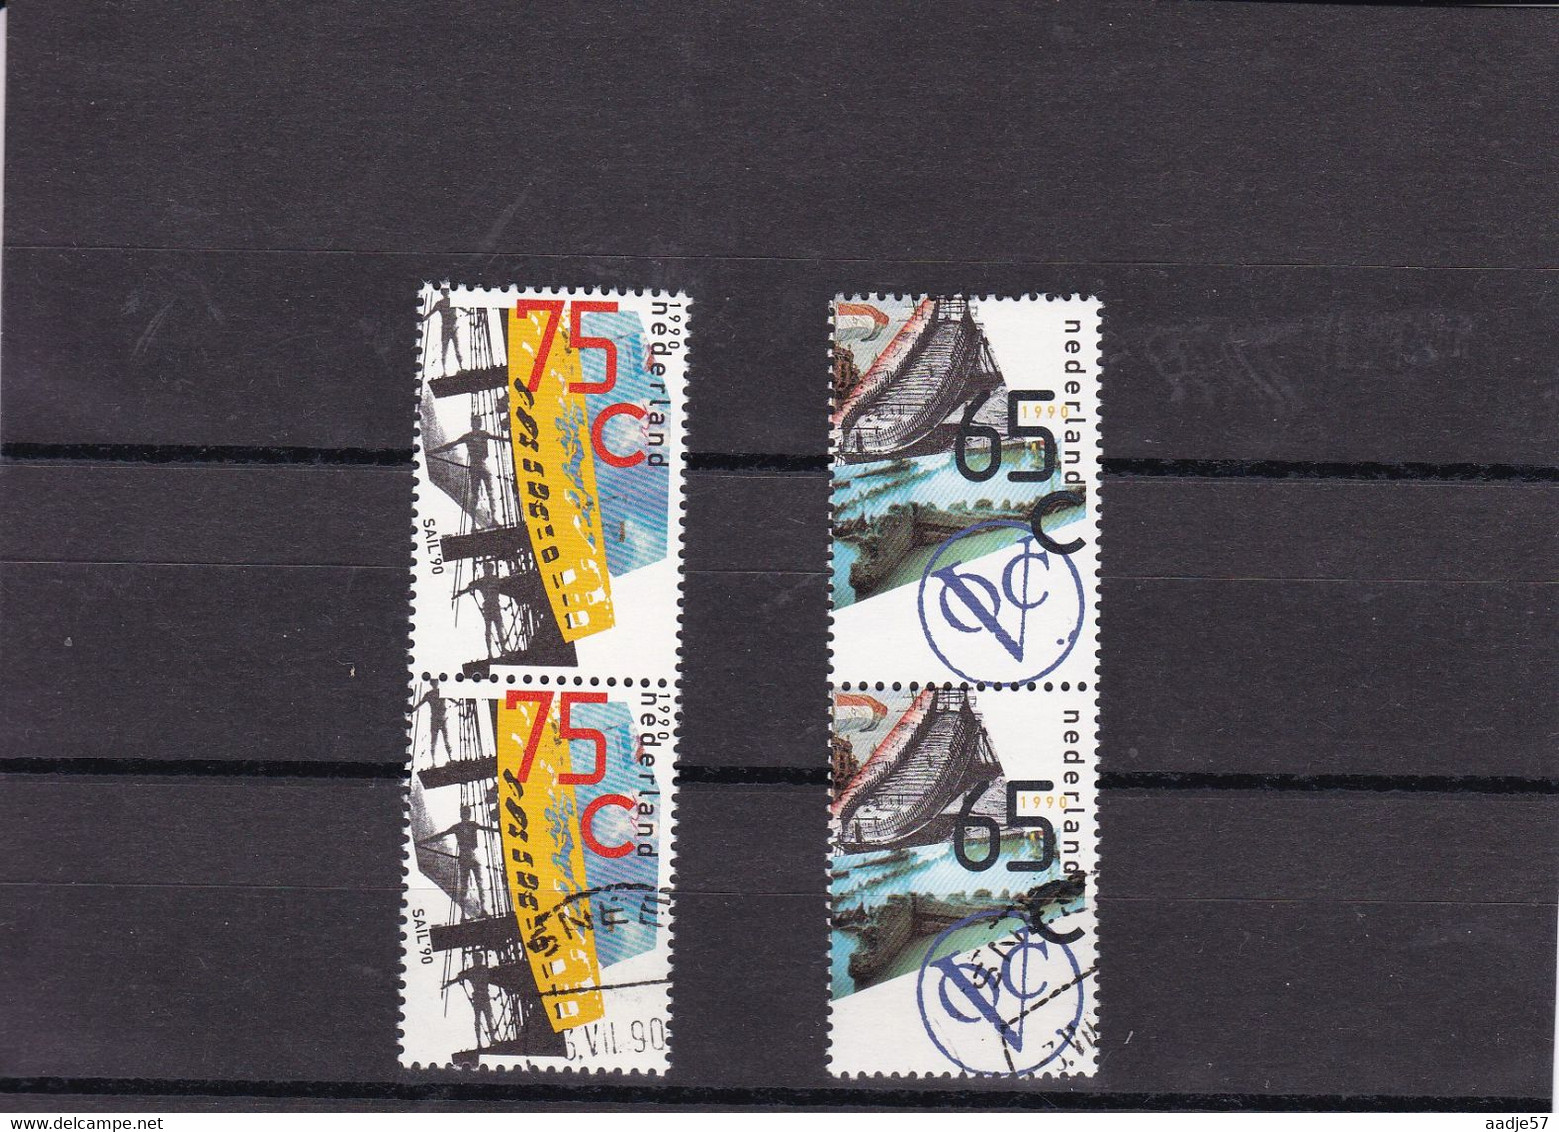 Sailboat, Bateaux, Boats, Schiffe, Schepen NVPH 1453-1454 (Mi 1388-1389); 1990 MNH **/ Used - Other & Unclassified